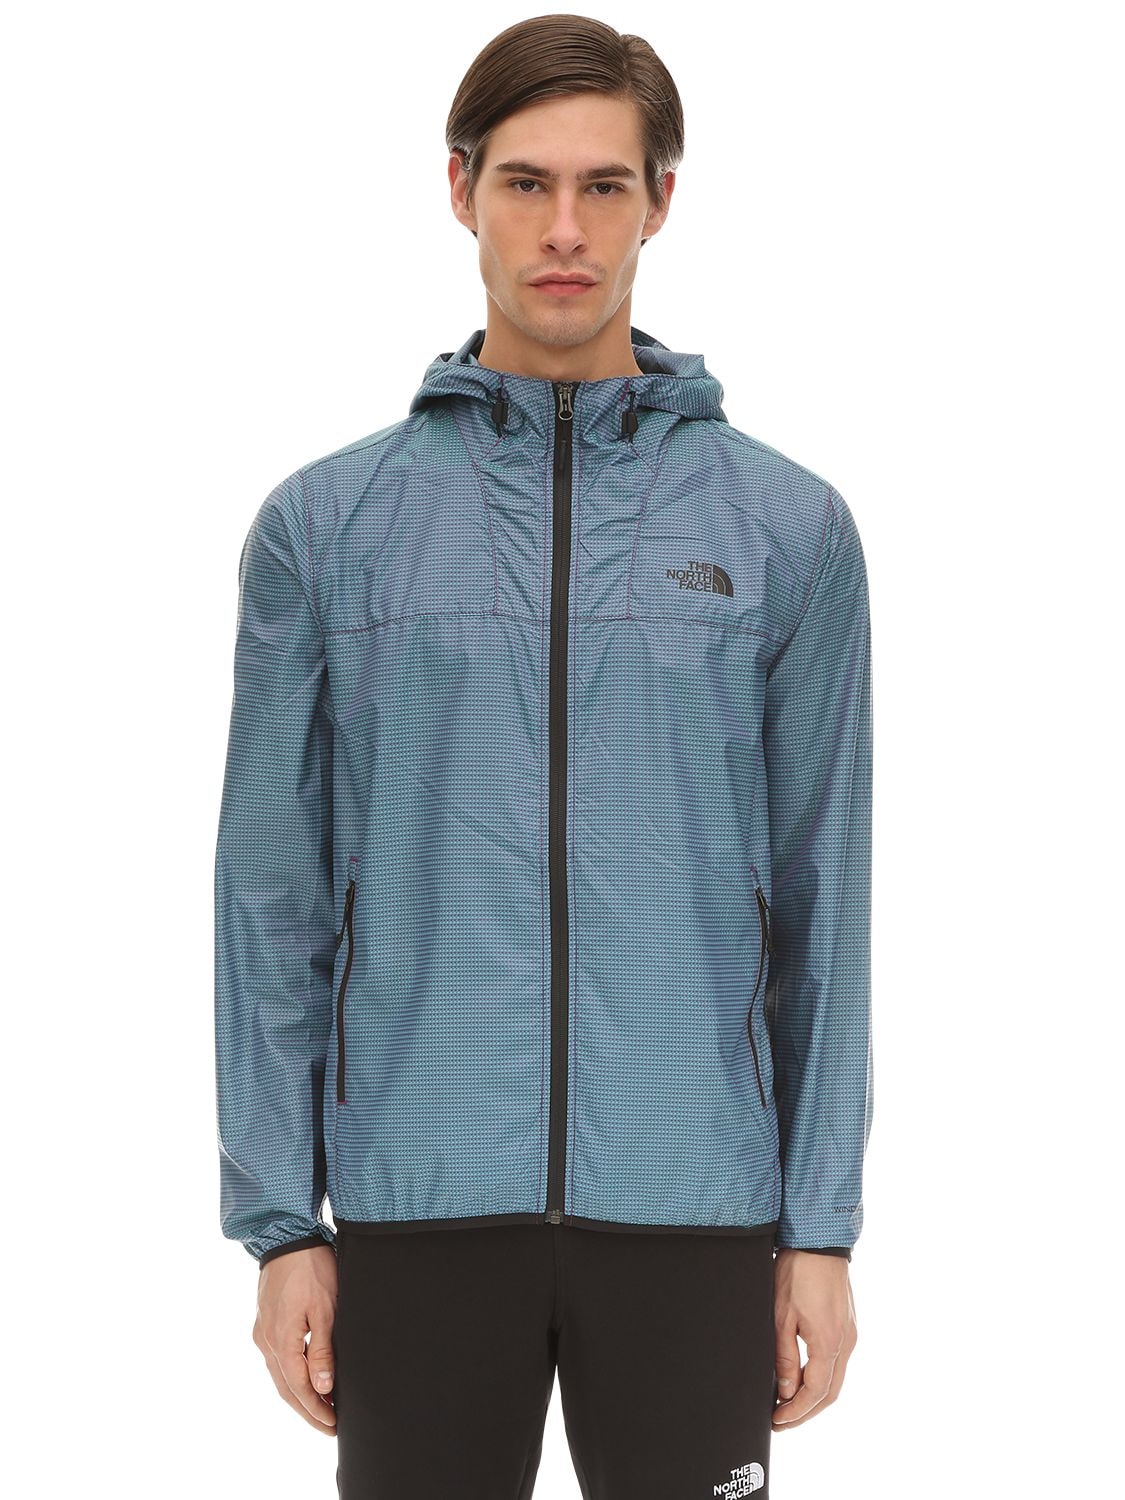 The North Face Novelty Cyclone 2.0 